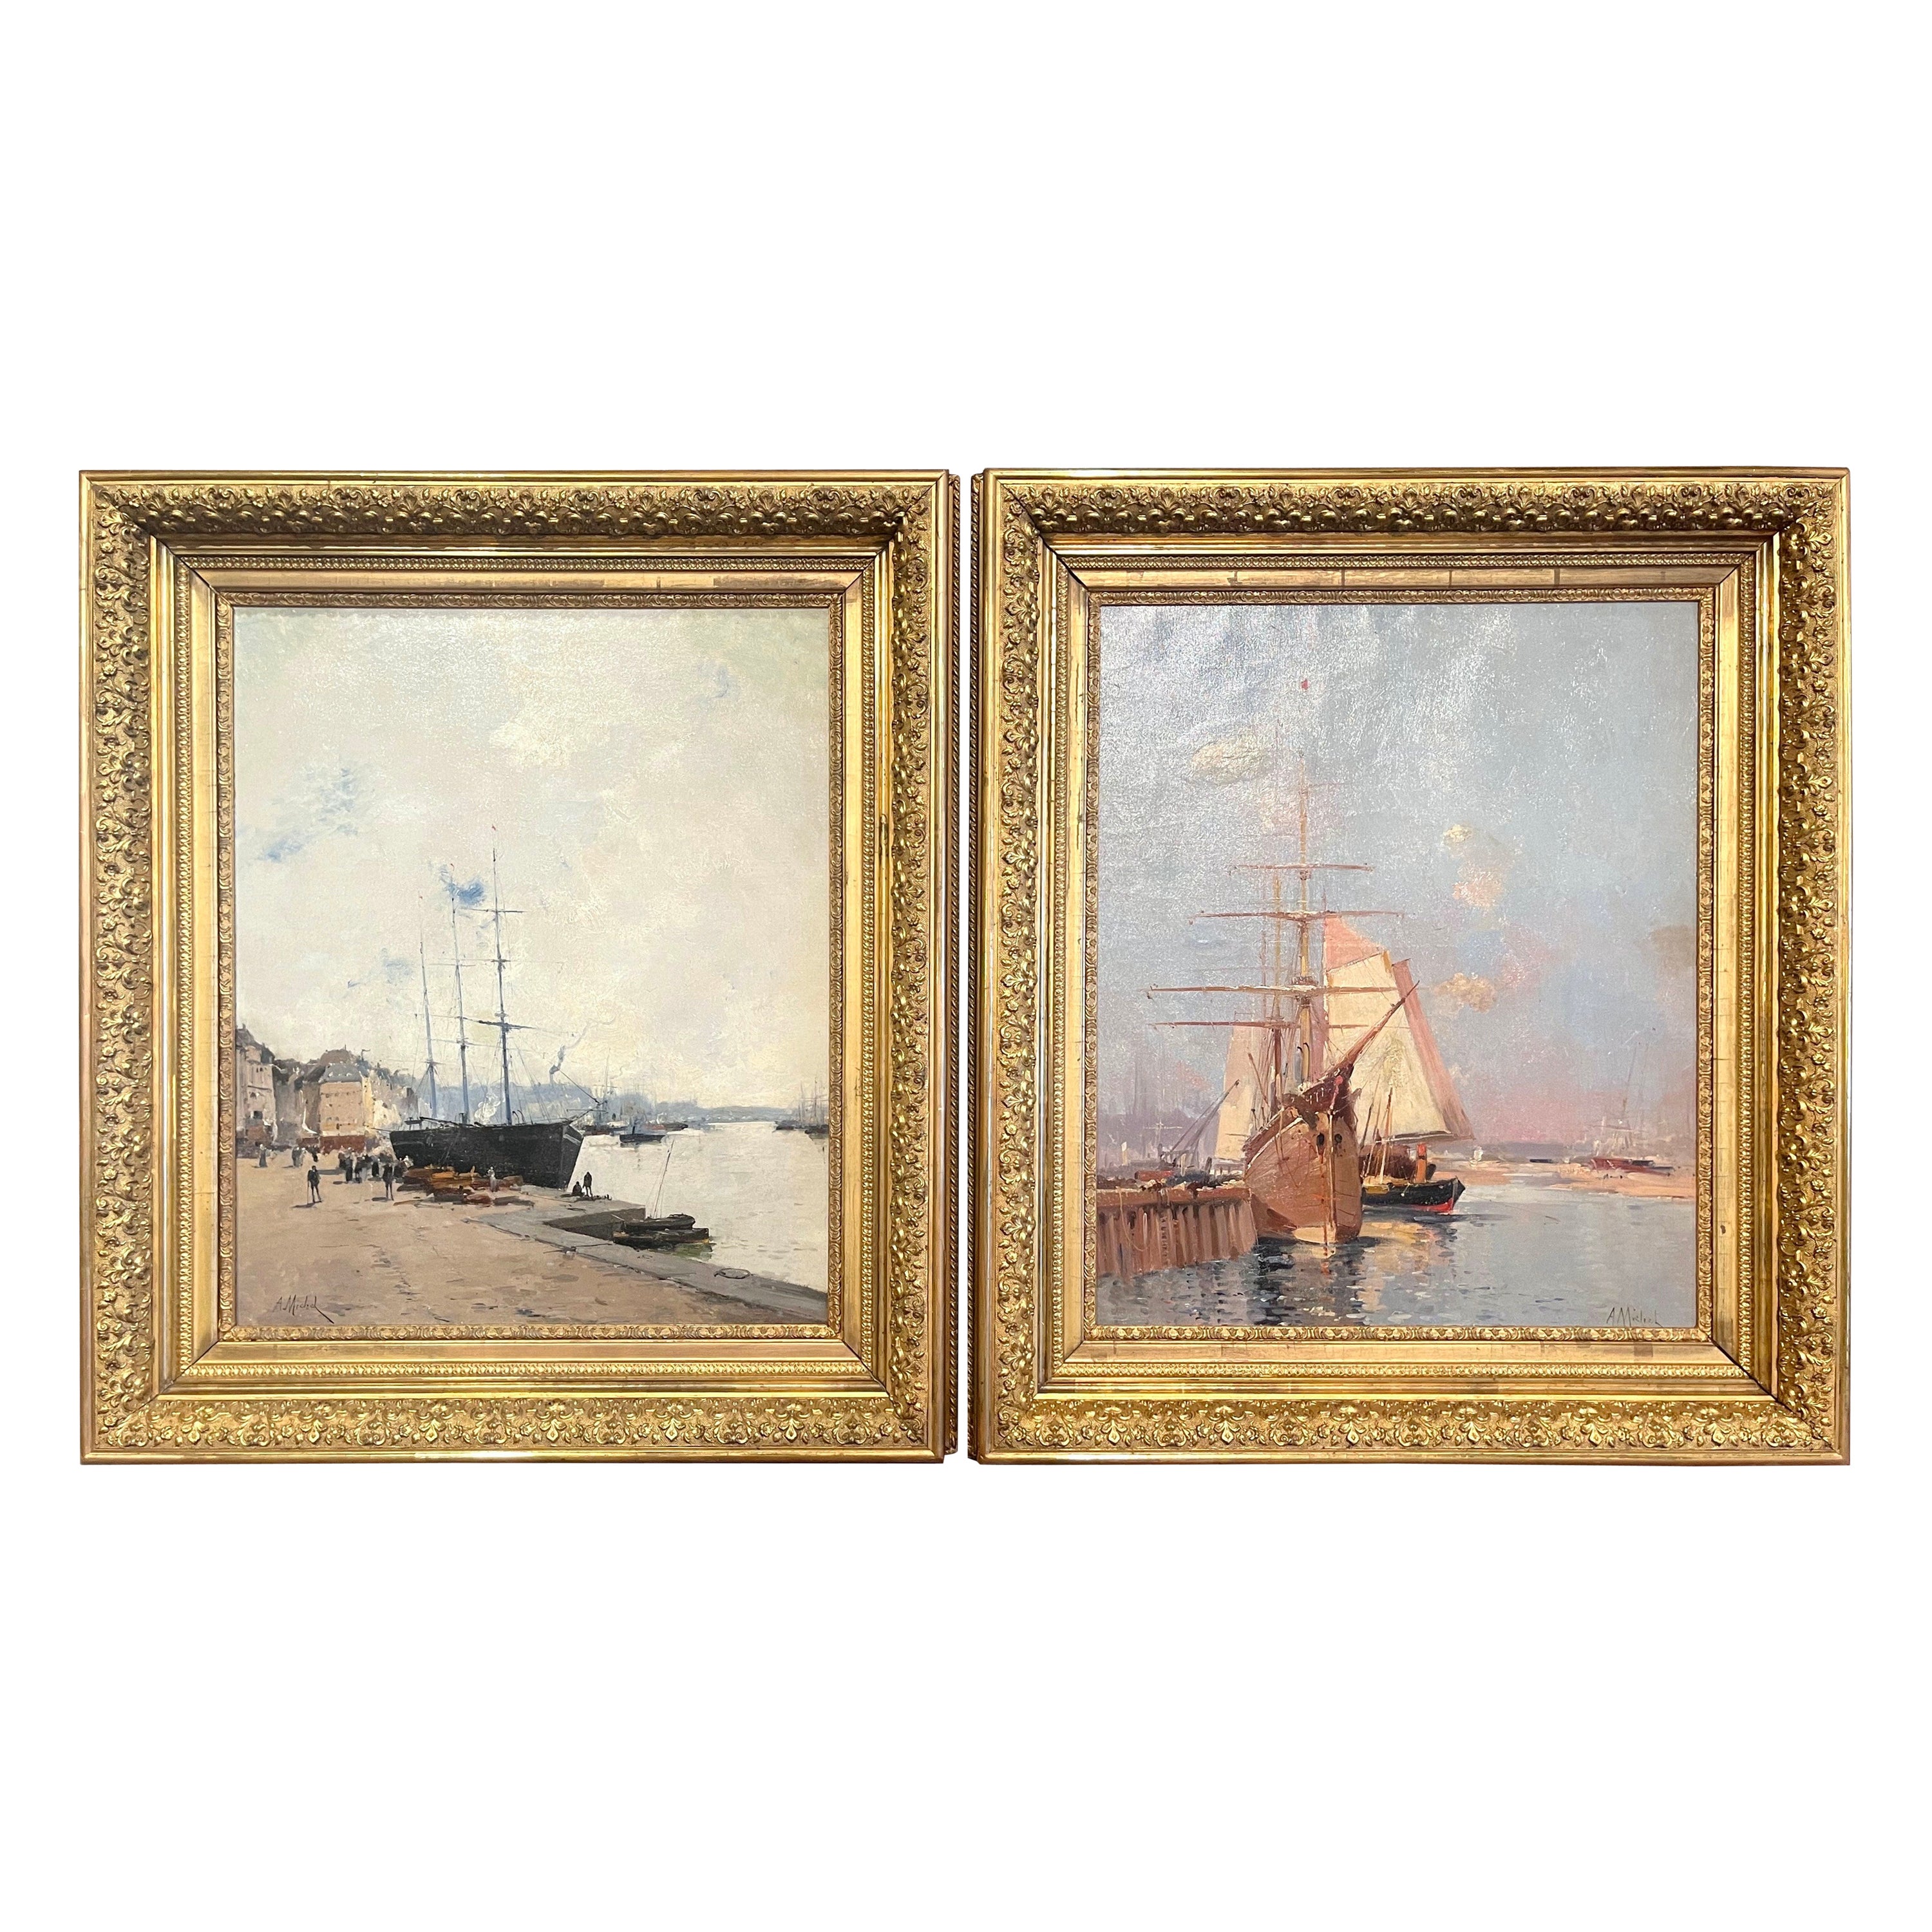 Pair of 19th Century Ship Oil Paintings Signed A. Michel for E. Galien-Laloue